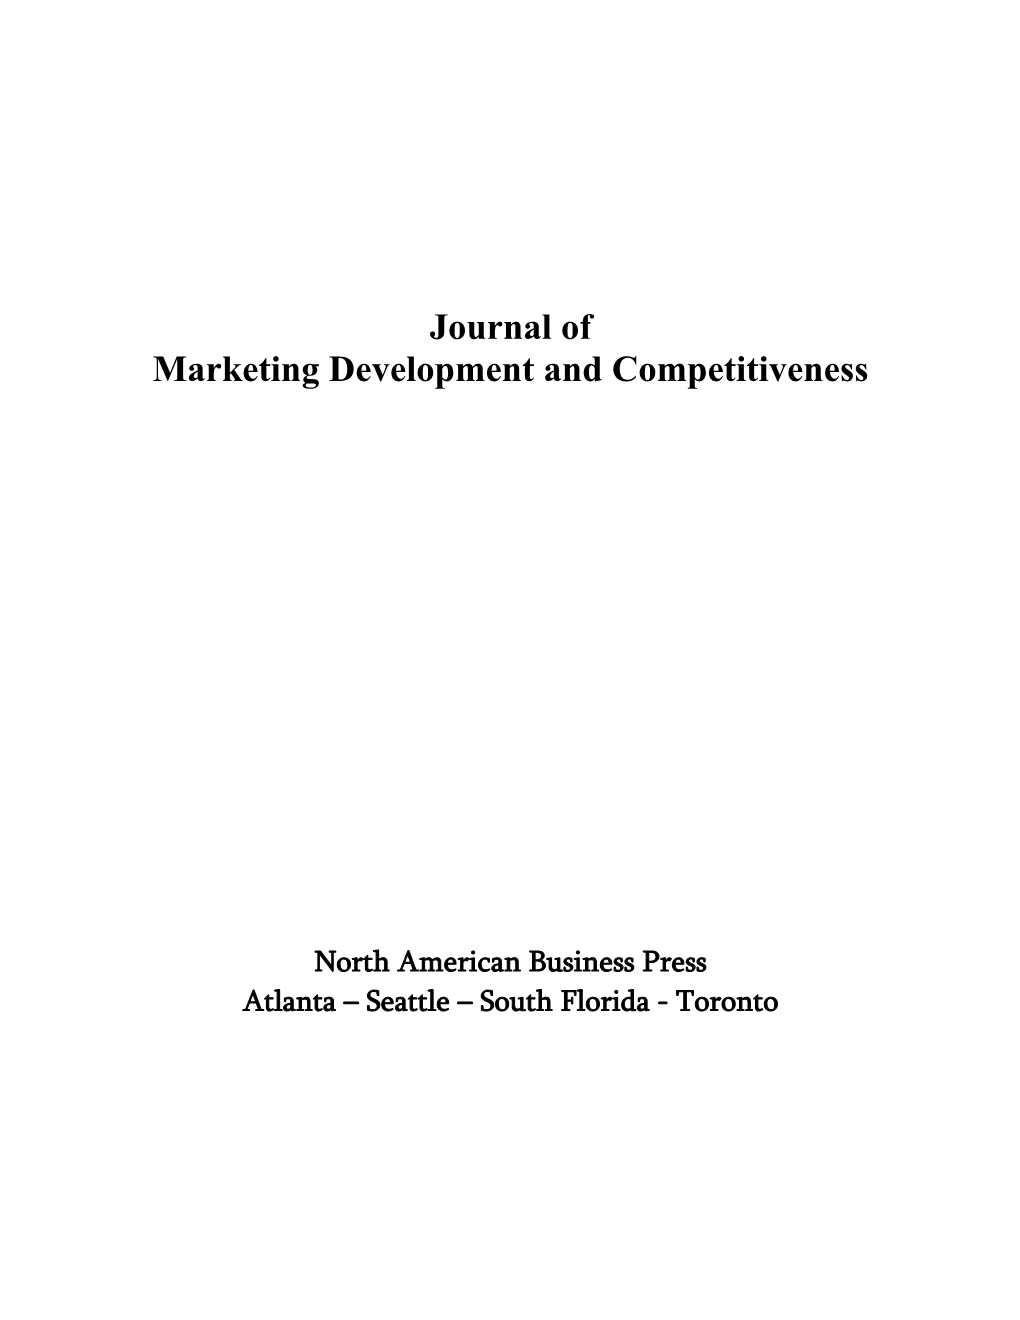 Journal of Marketing Development and Competitiveness